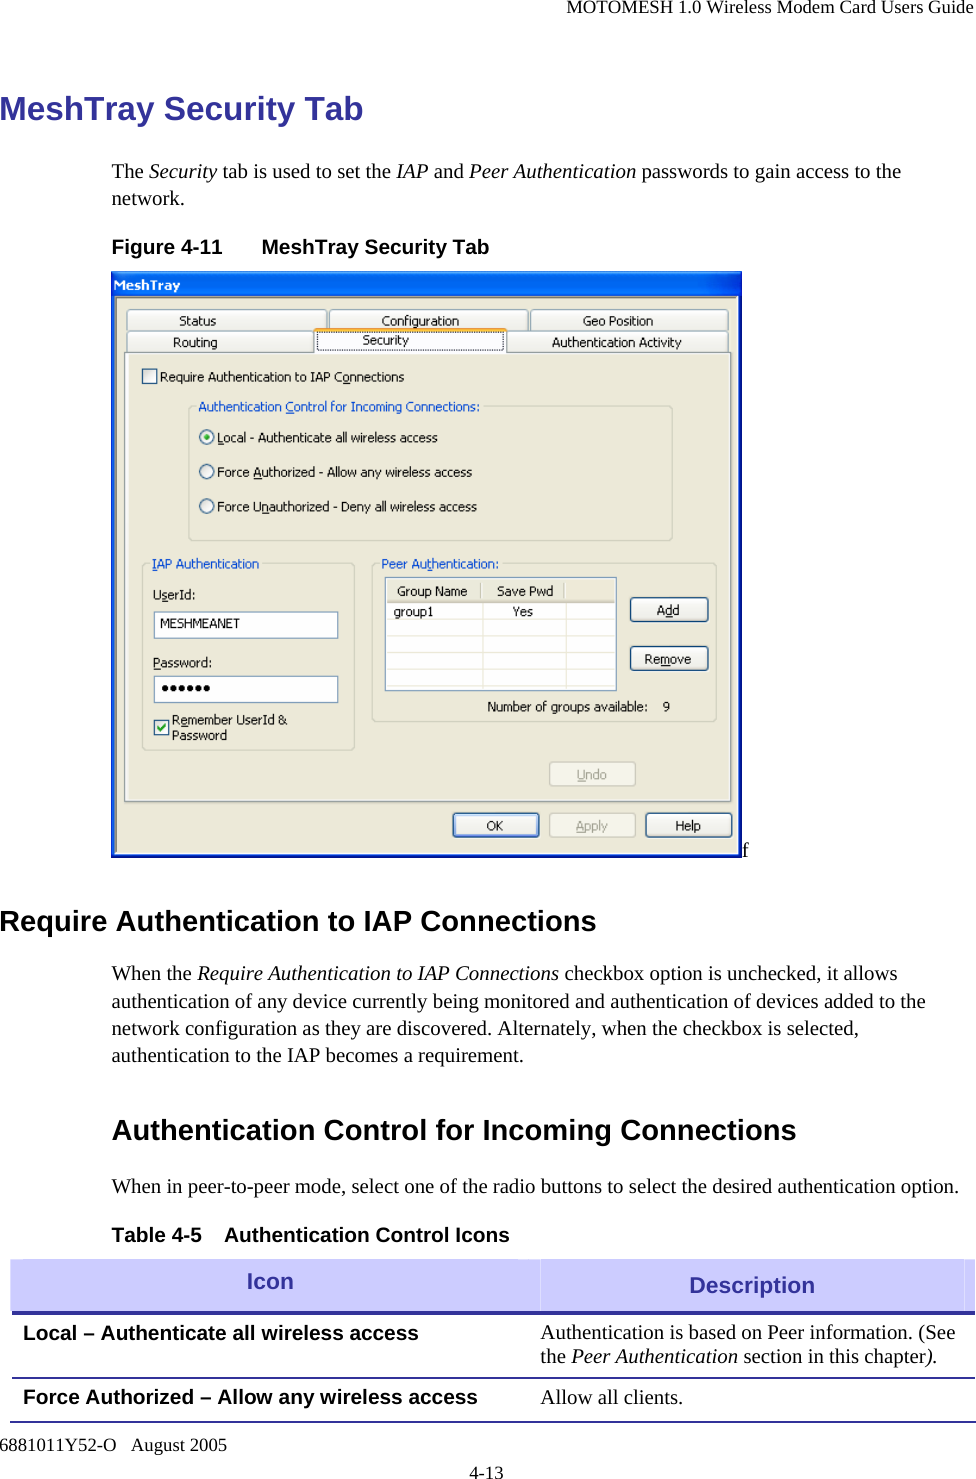 MOTOMESH 1.0 Wireless Modem Card Users Guide 6881011Y52-O   August 2005 4-13 MeshTray Security Tab The Security tab is used to set the IAP and Peer Authentication passwords to gain access to the network. Figure 4-11  MeshTray Security Tab f Require Authentication to IAP Connections When the Require Authentication to IAP Connections checkbox option is unchecked, it allows authentication of any device currently being monitored and authentication of devices added to the network configuration as they are discovered. Alternately, when the checkbox is selected, authentication to the IAP becomes a requirement.  Authentication Control for Incoming Connections When in peer-to-peer mode, select one of the radio buttons to select the desired authentication option. Table 4-5  Authentication Control Icons Icon   Description Local – Authenticate all wireless access  Authentication is based on Peer information. (See the Peer Authentication section in this chapter). Force Authorized – Allow any wireless access  Allow all clients. 